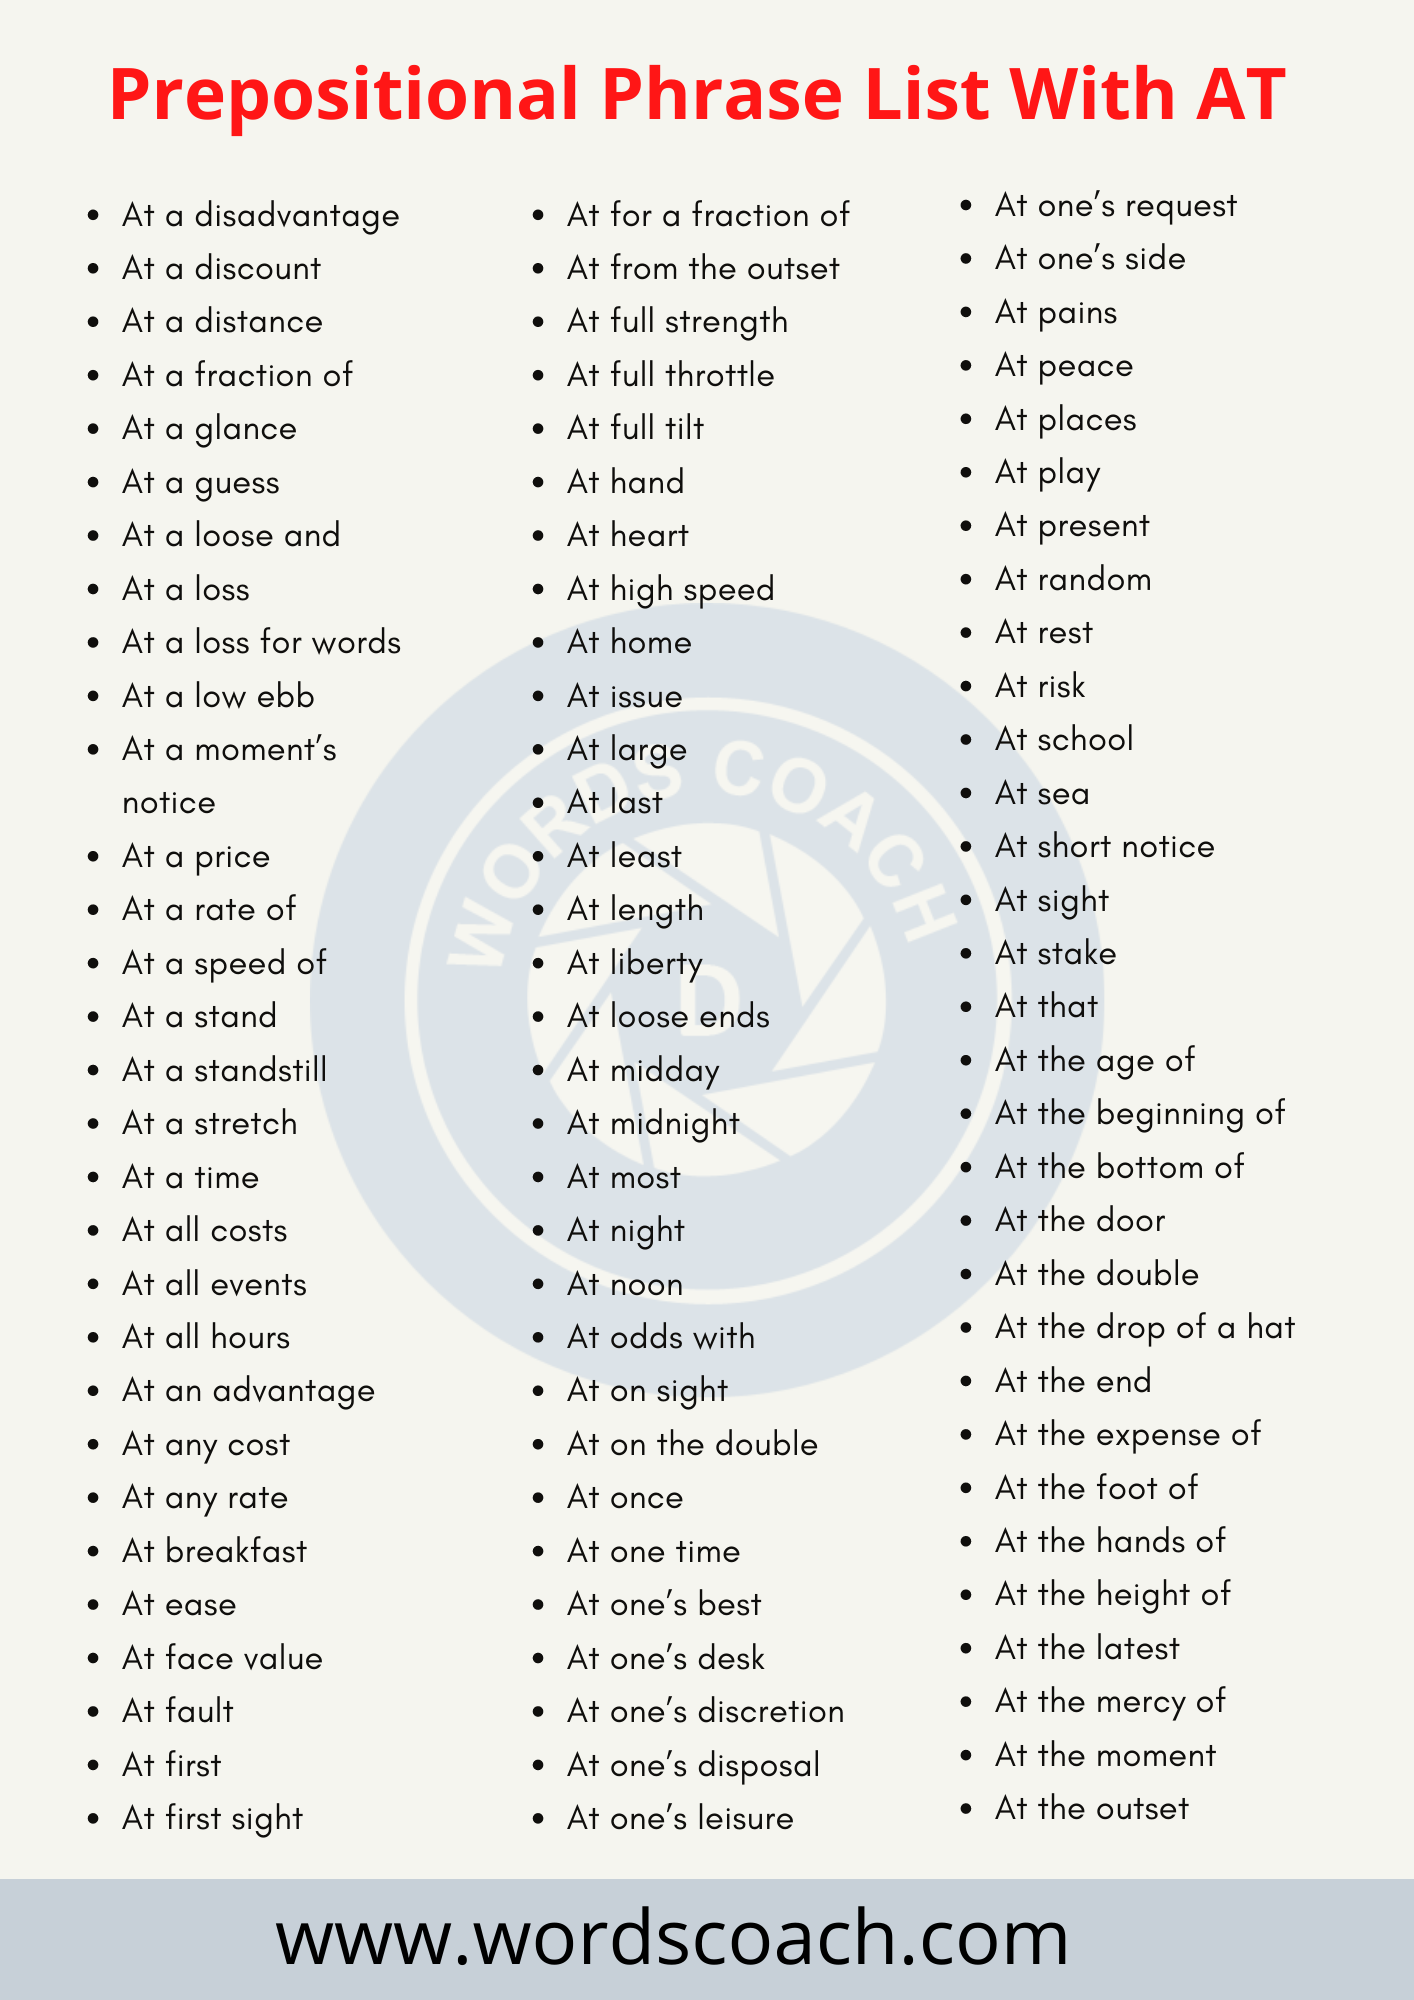 Prepositional Phrase List With AT - wordscoach.com